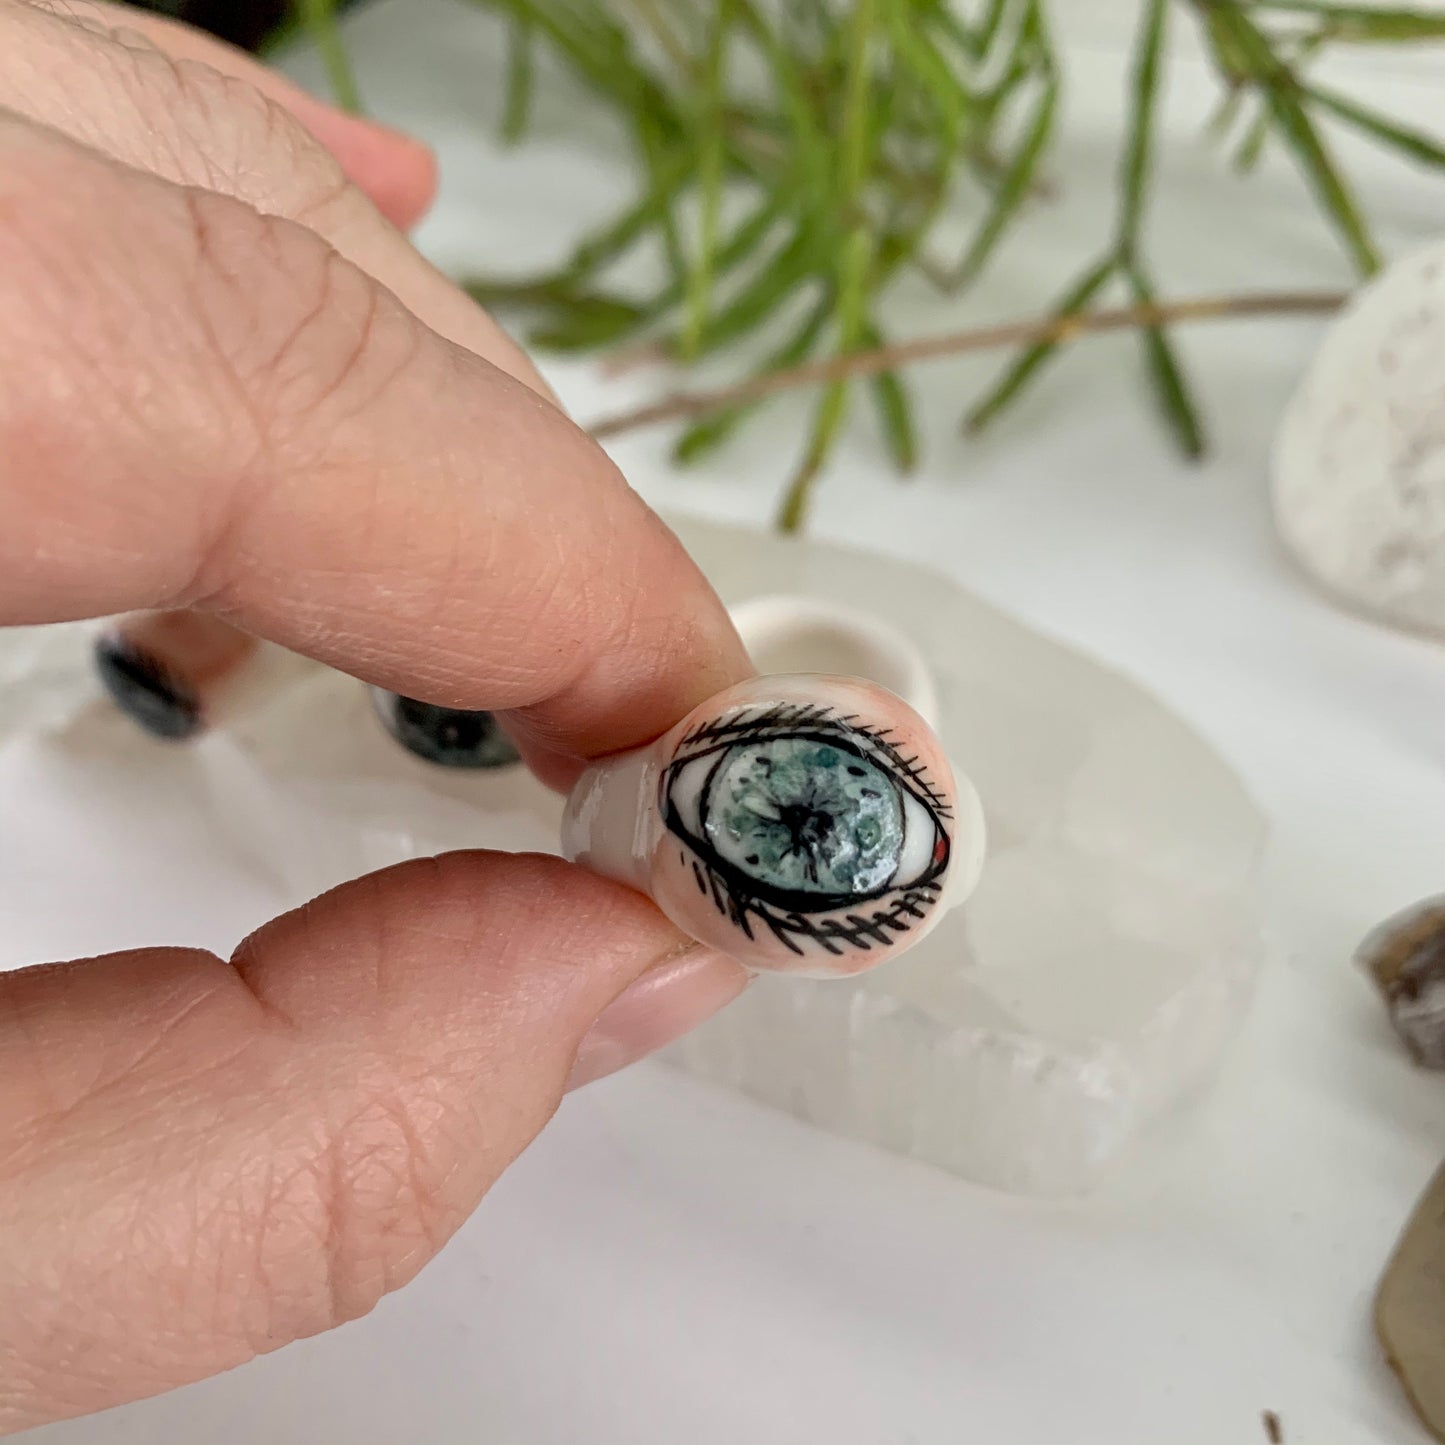 Hand painted porcelain‘the protective eye’ ring, choose a size